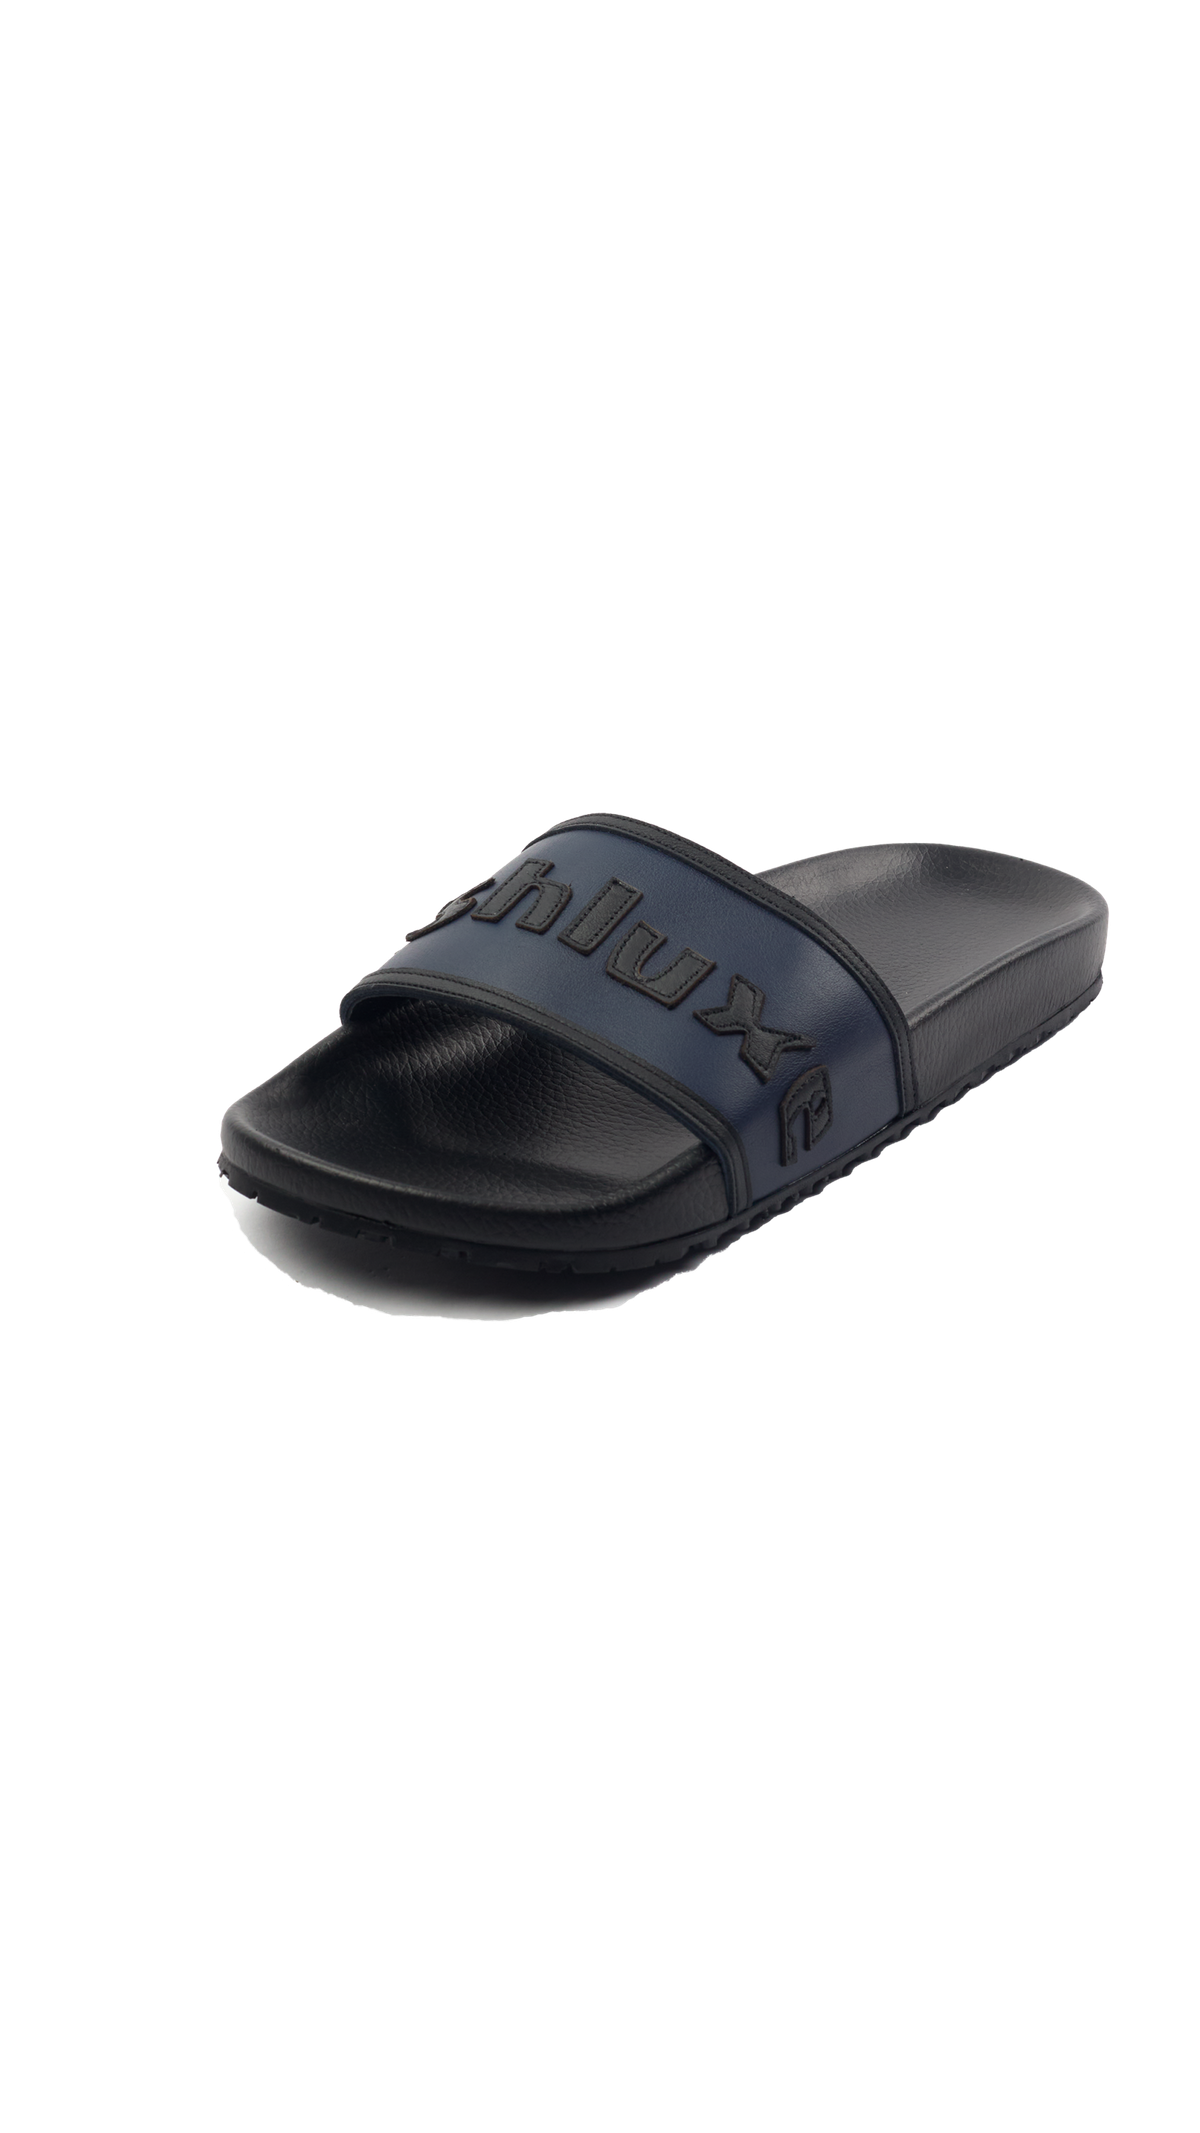 Ashluxe Stitched Leather Slides - Blue